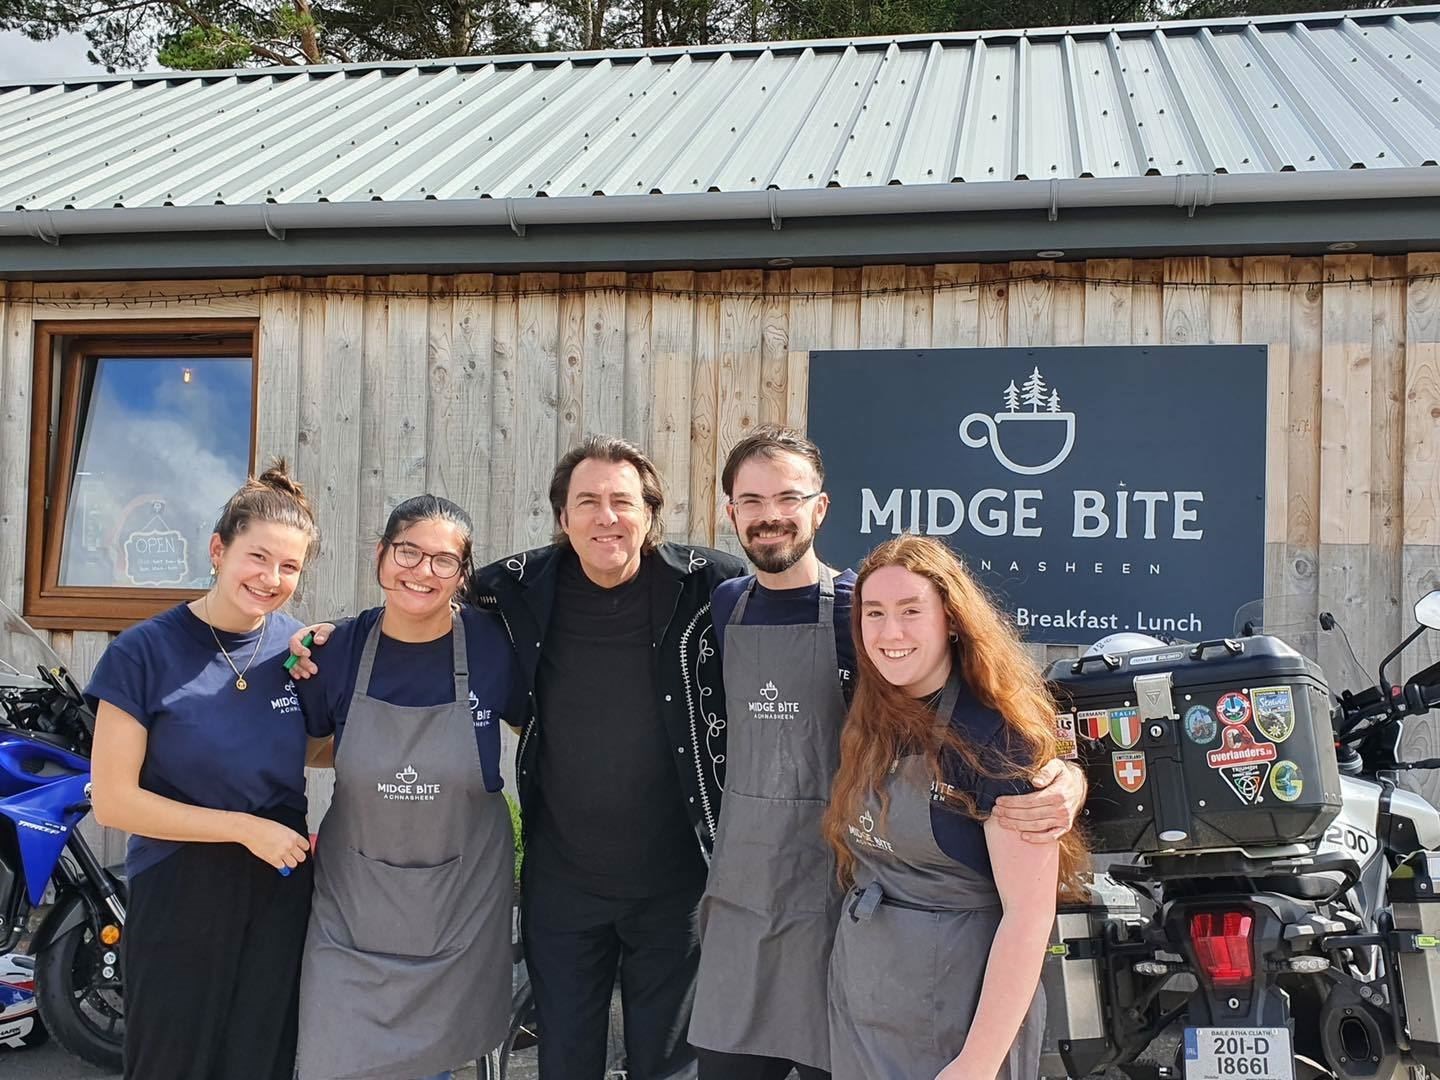 Jonathan (centre) flanked by (from left) Ella Moxon, Kristin langdale, Lewis Mackenzie and Joanna Maclennan. Picture courtesy of The Midge Bite.